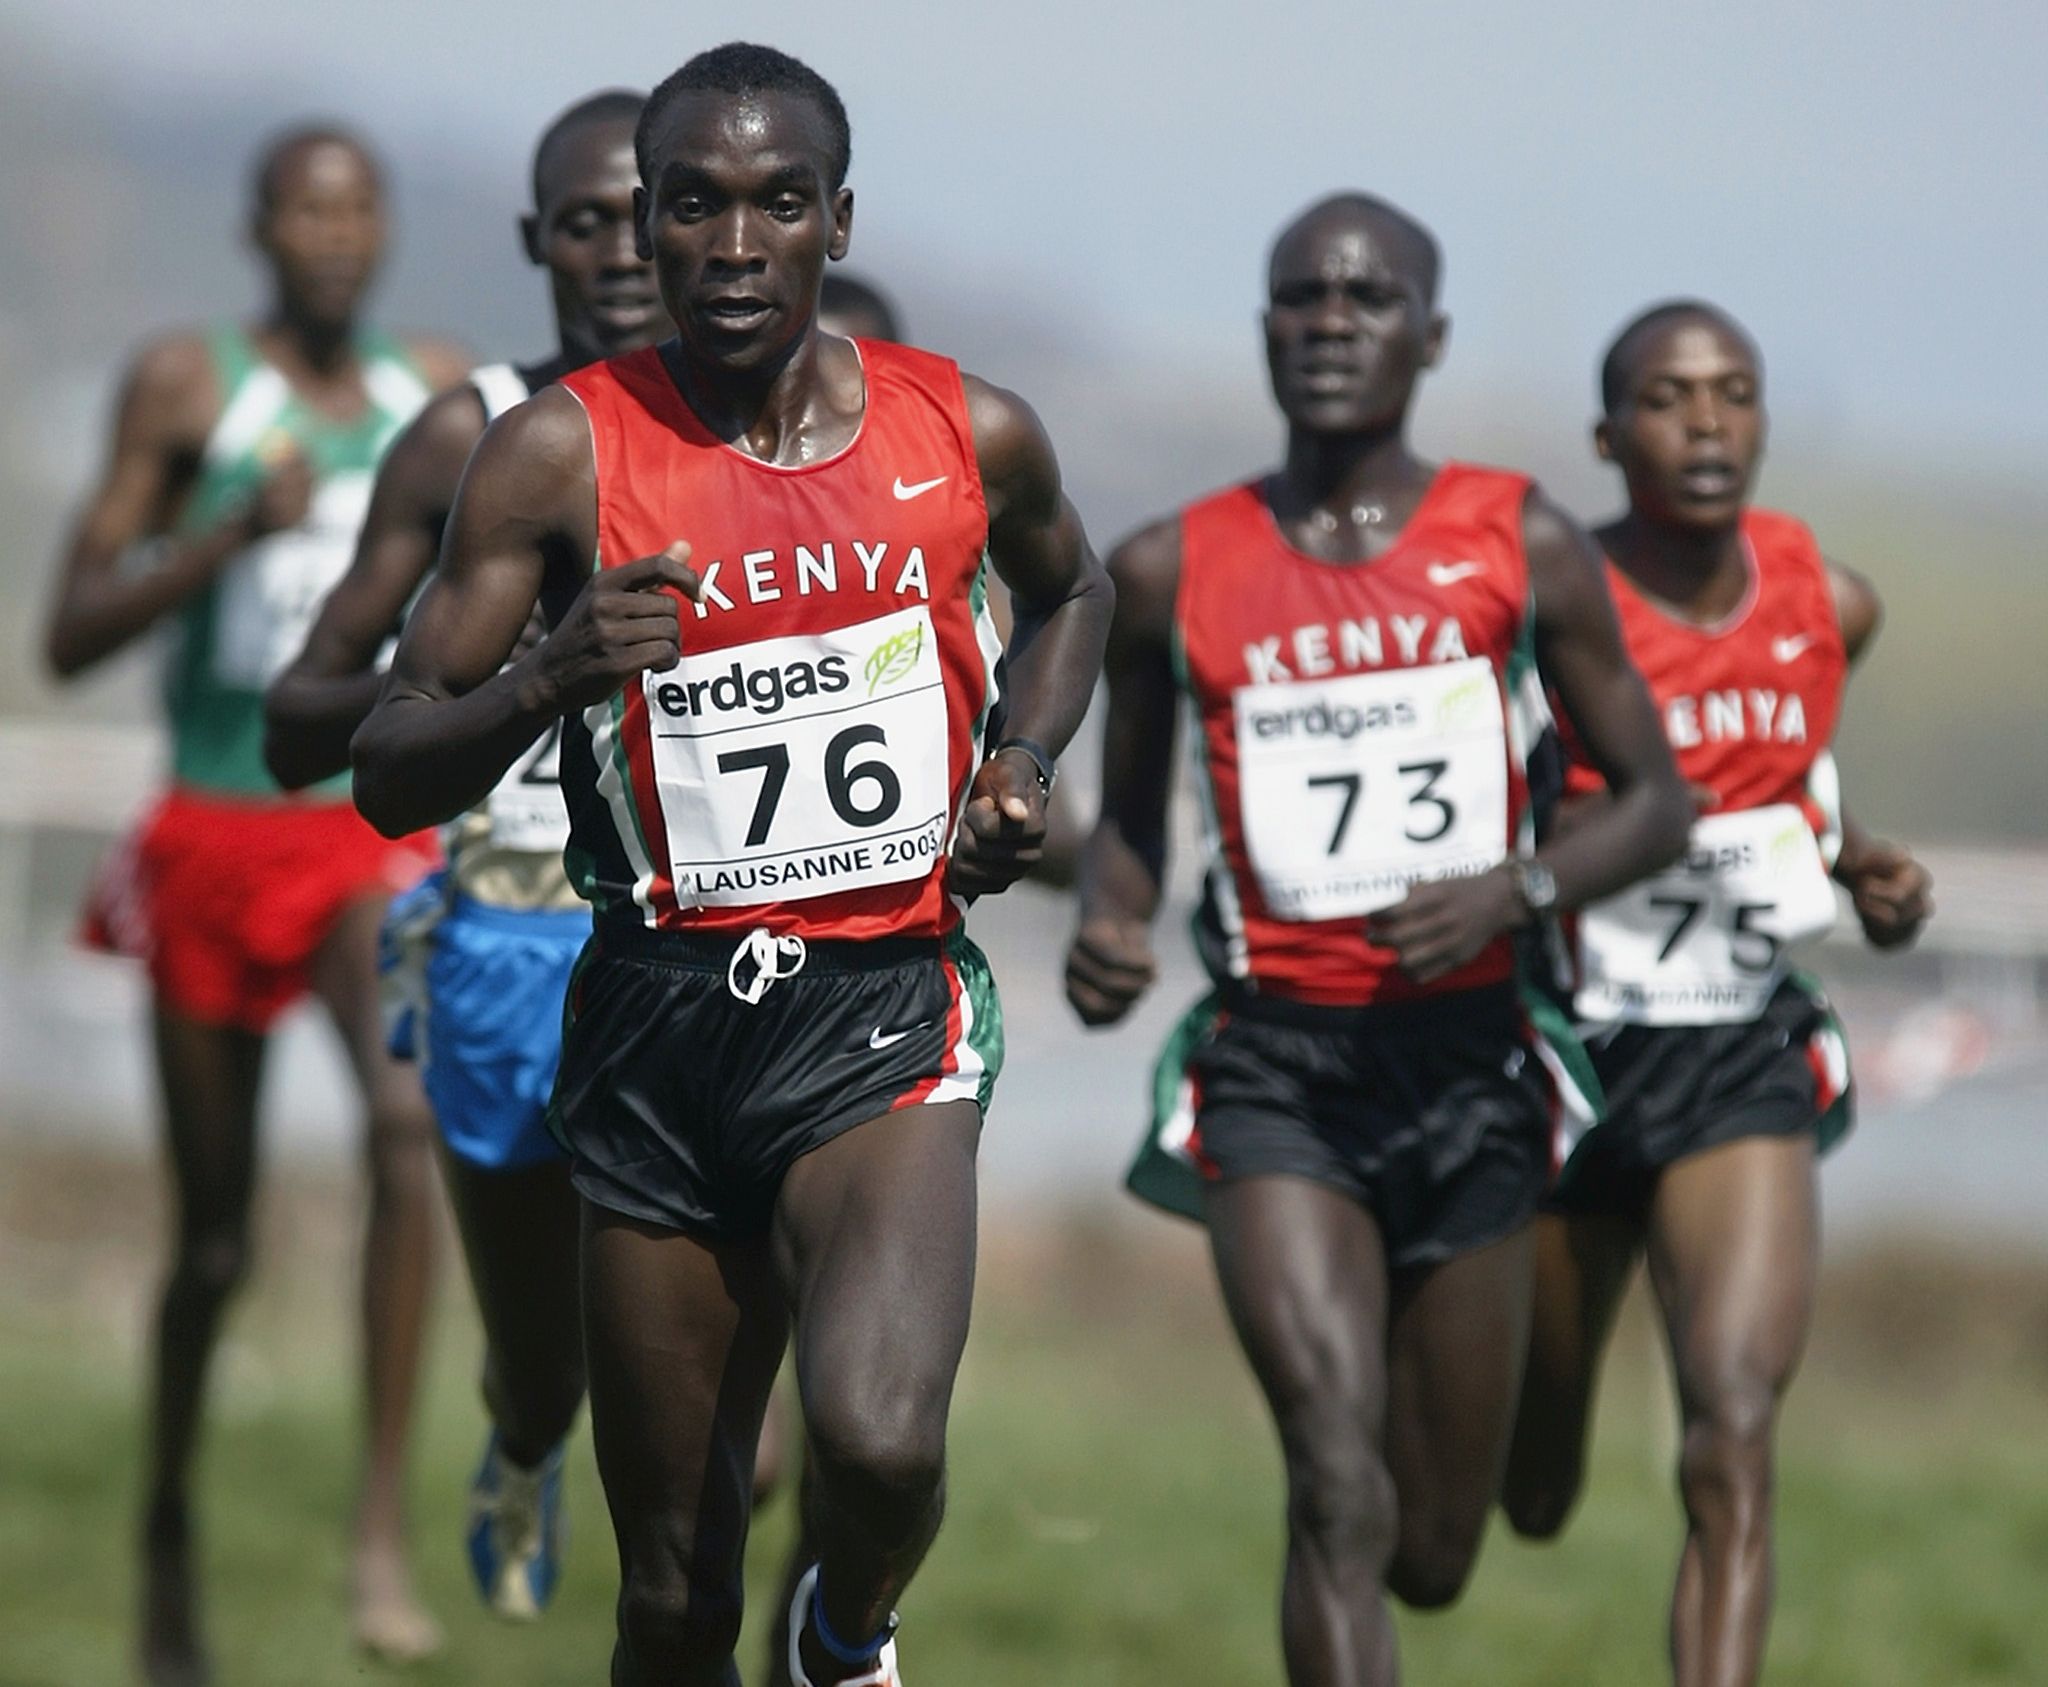 Eliud Kipchoge in the U20 men's race at the 2003 World Cross Country Championships